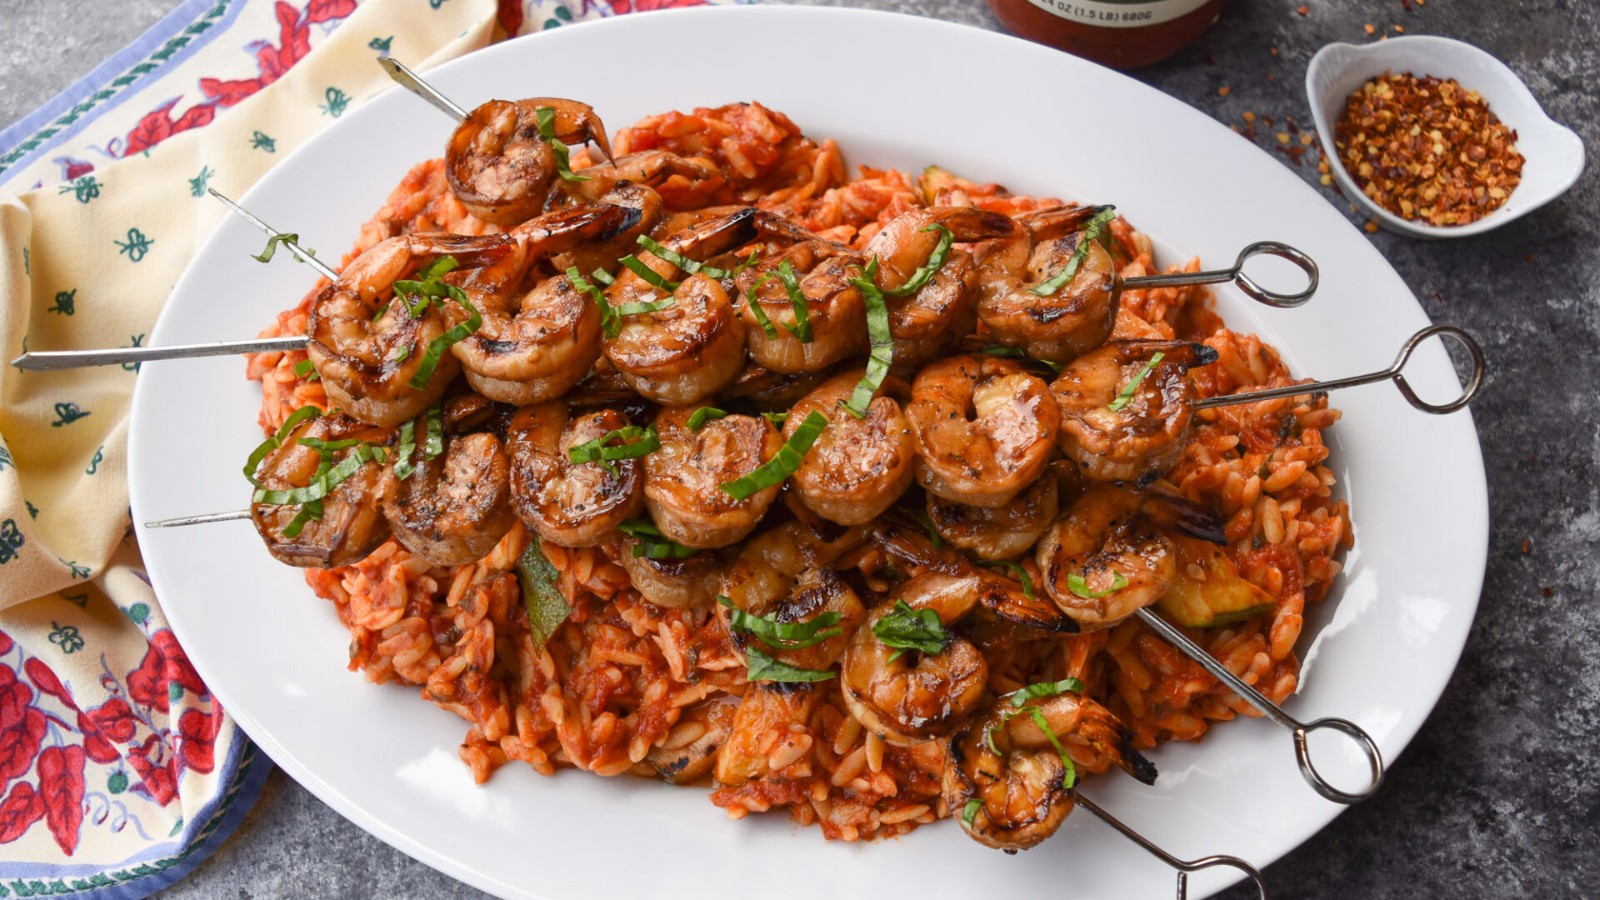 Image of Serena Wolf’s Orzo with Tomato Basil Sauce, Zucchini, and Grilled Shrimp